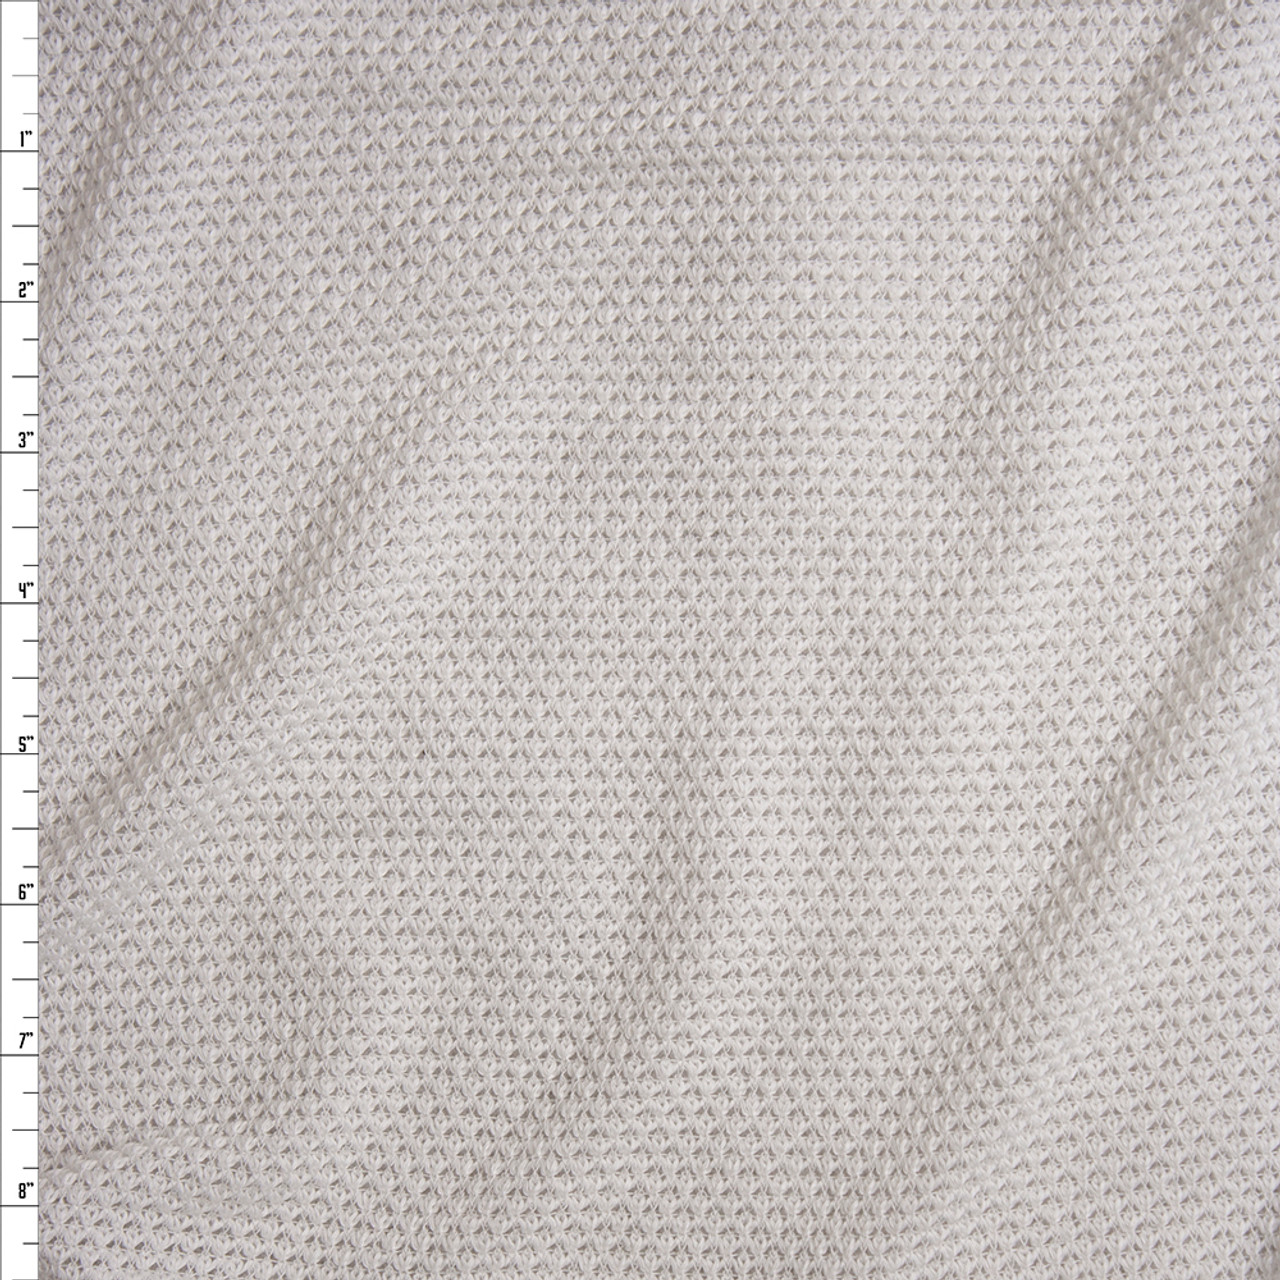 Cali Fabrics White Loose Weave Stretch Sweater Knit Fabric by the Yard